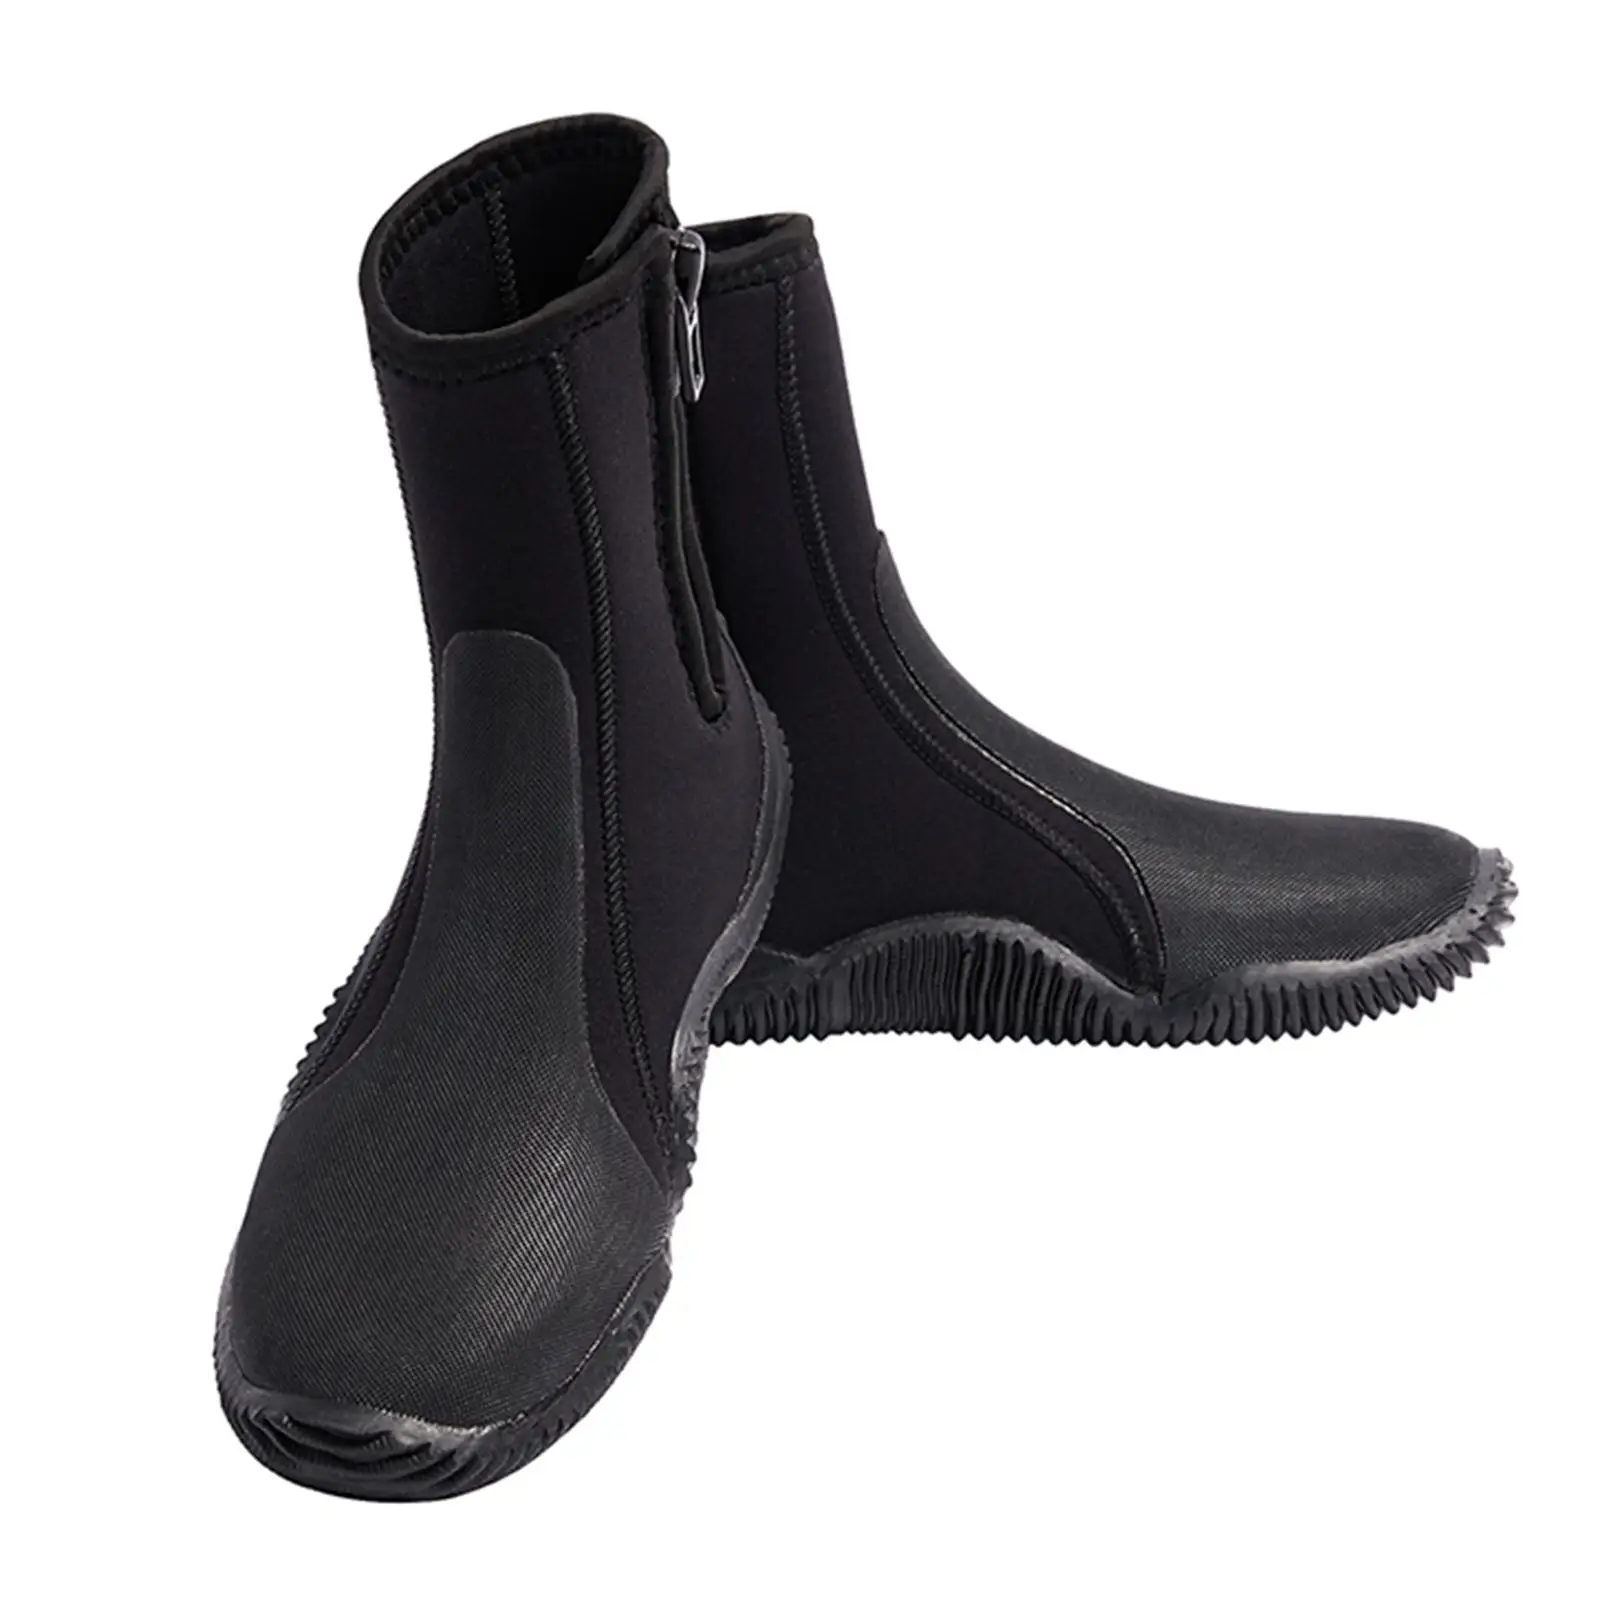 5mm Diving Boots, Adult Anti-slip Sole, Water Shoes, Comfortable